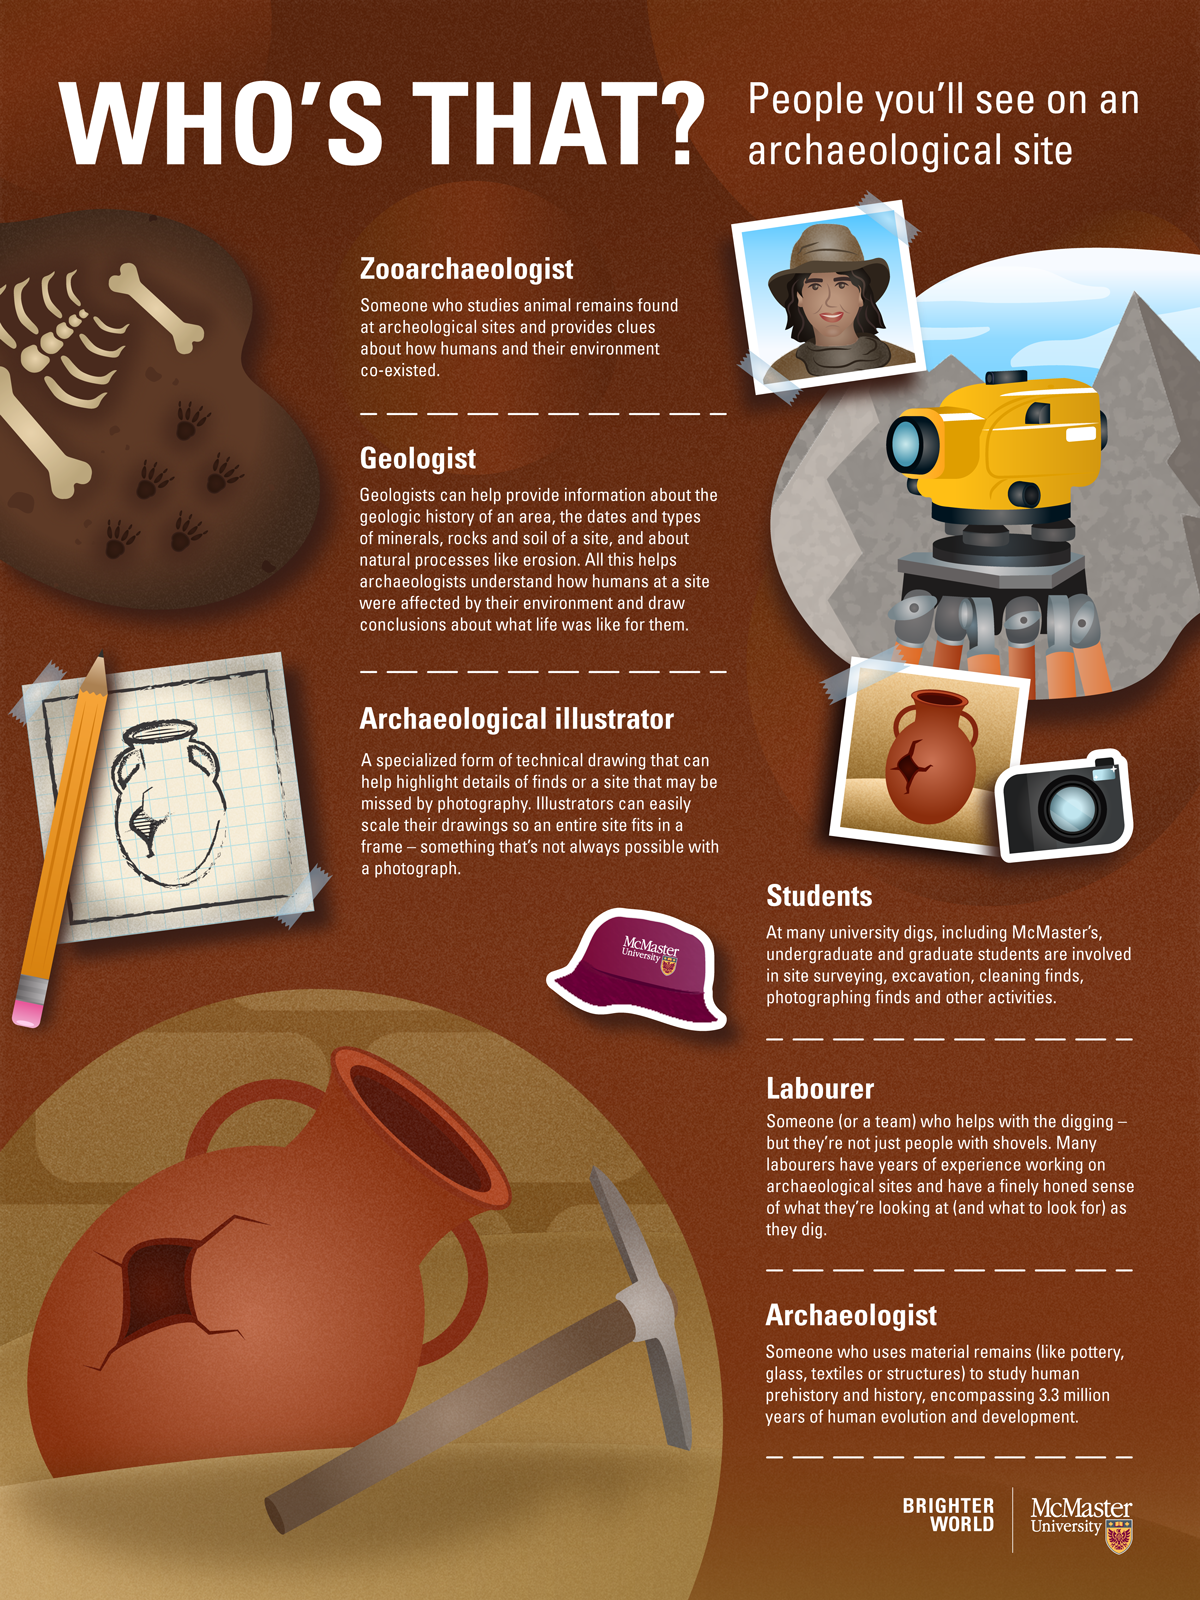 An infographic that defines key archaeological terms, such as zooarchaeologist, geologist, archaeological illustrator, students, labourer, and archaeologist.